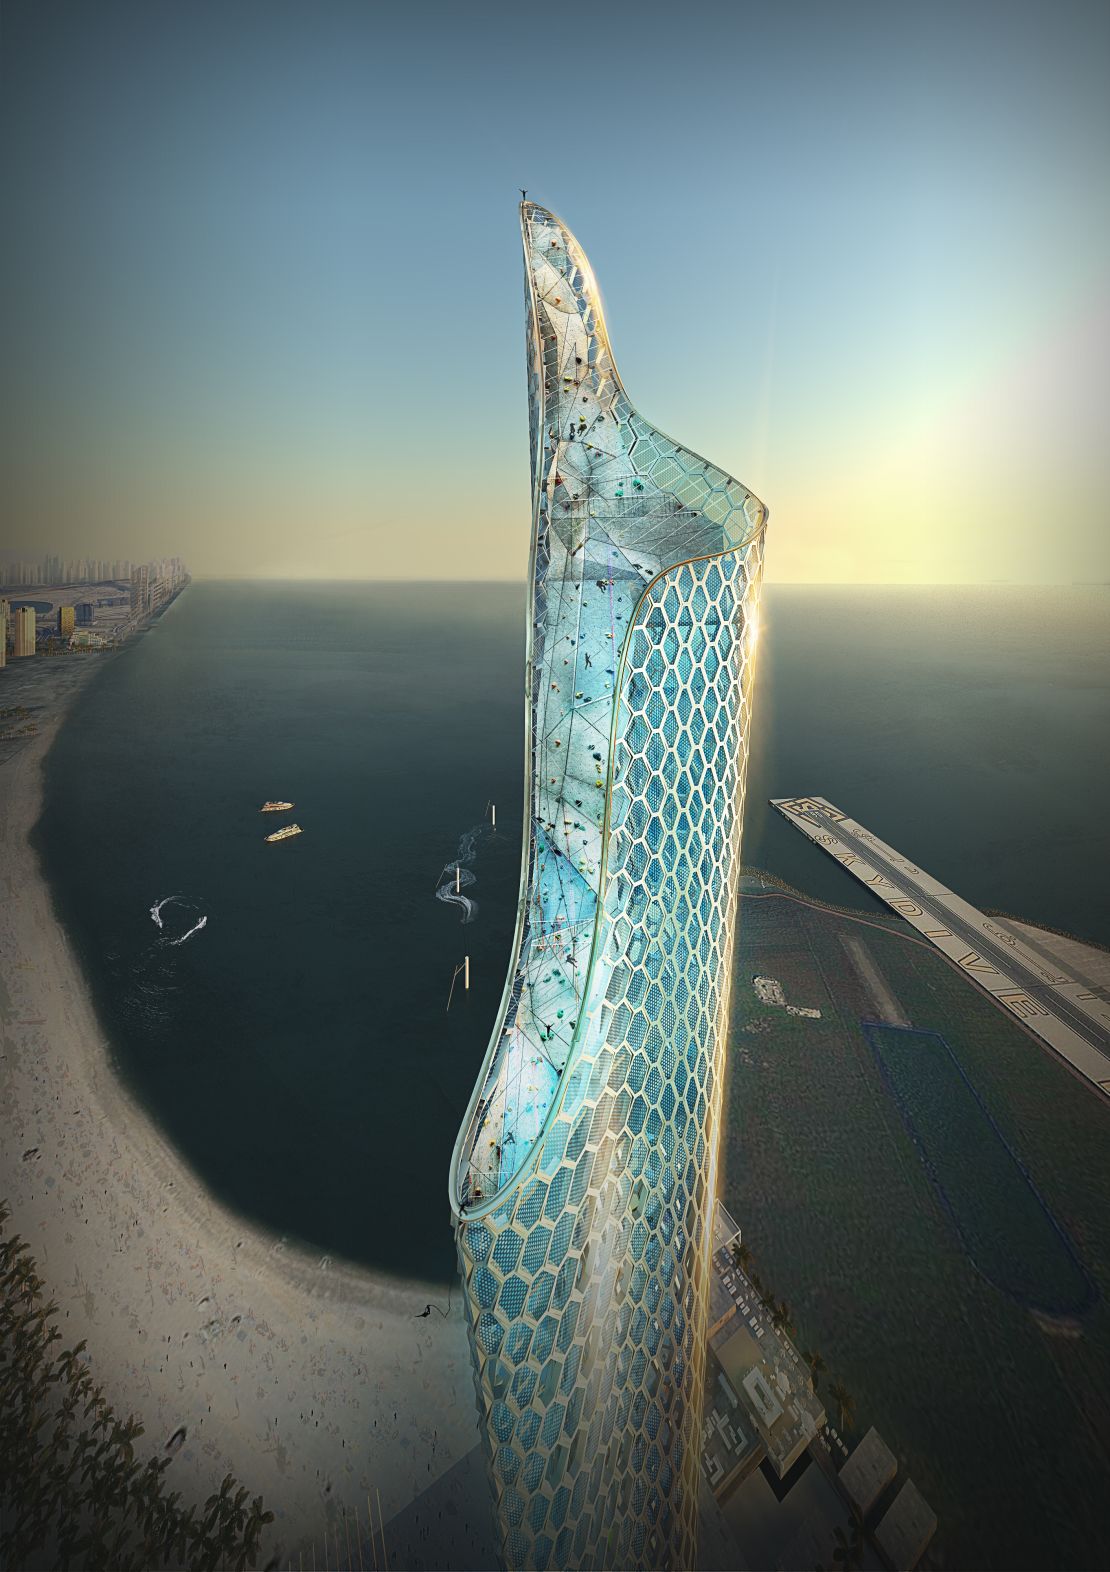 10 Design say the tower's interior will feature climbing walls and a professionals-only BASE jump platform at its peak.